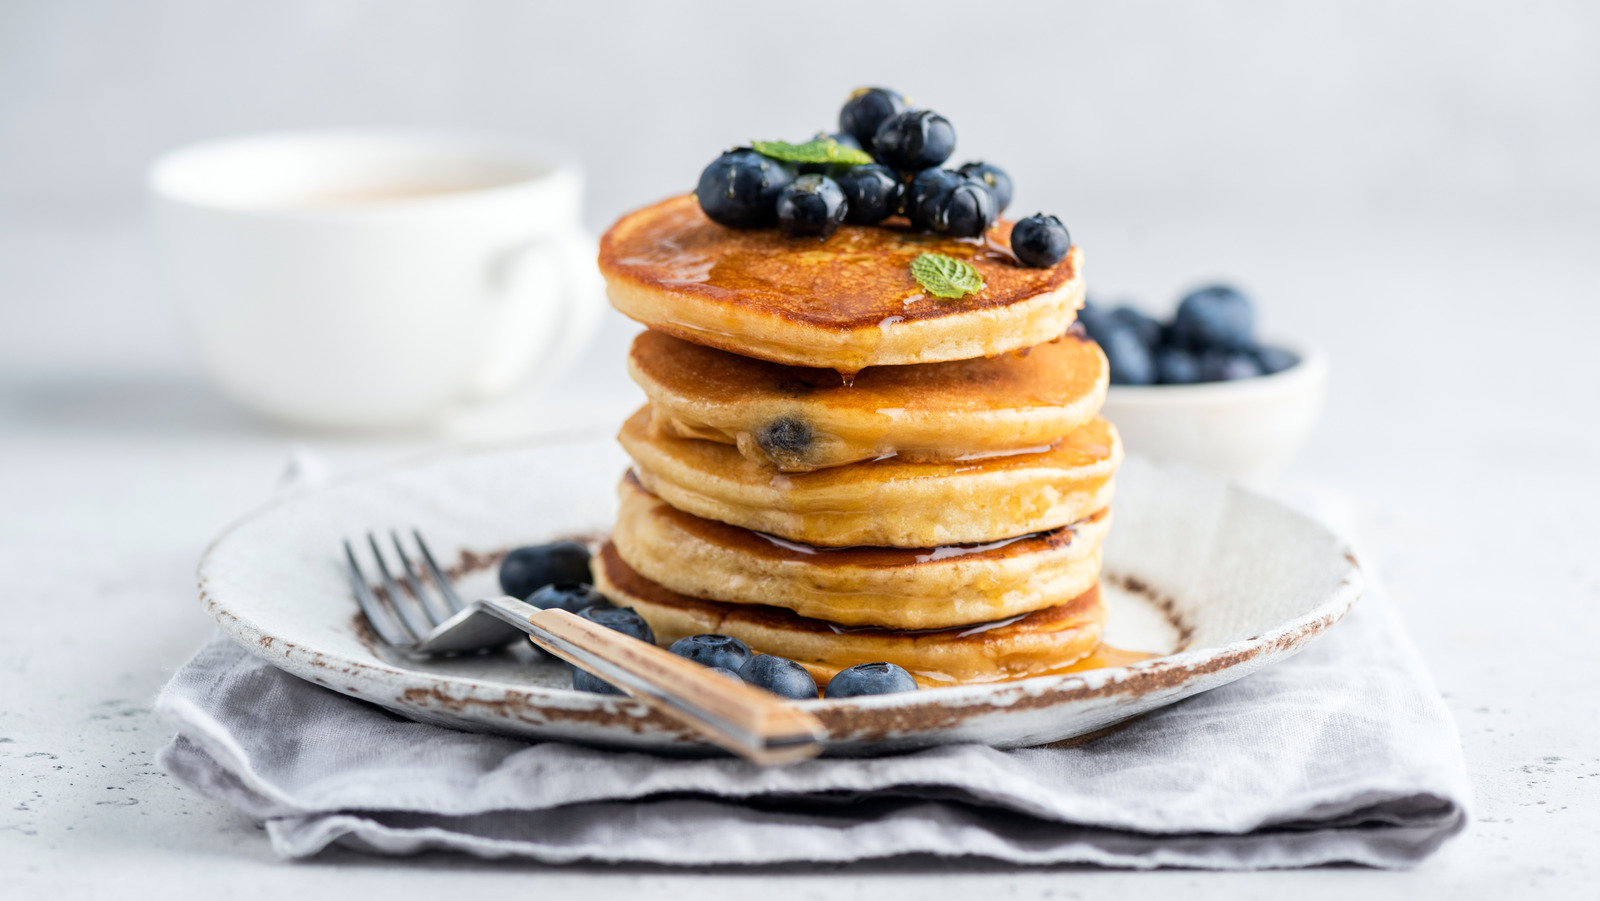 https://www.tastingtable.com/img/gallery/the-best-grocery-store-pancake-mixes-ranked/l-intro-1652972575.jpg